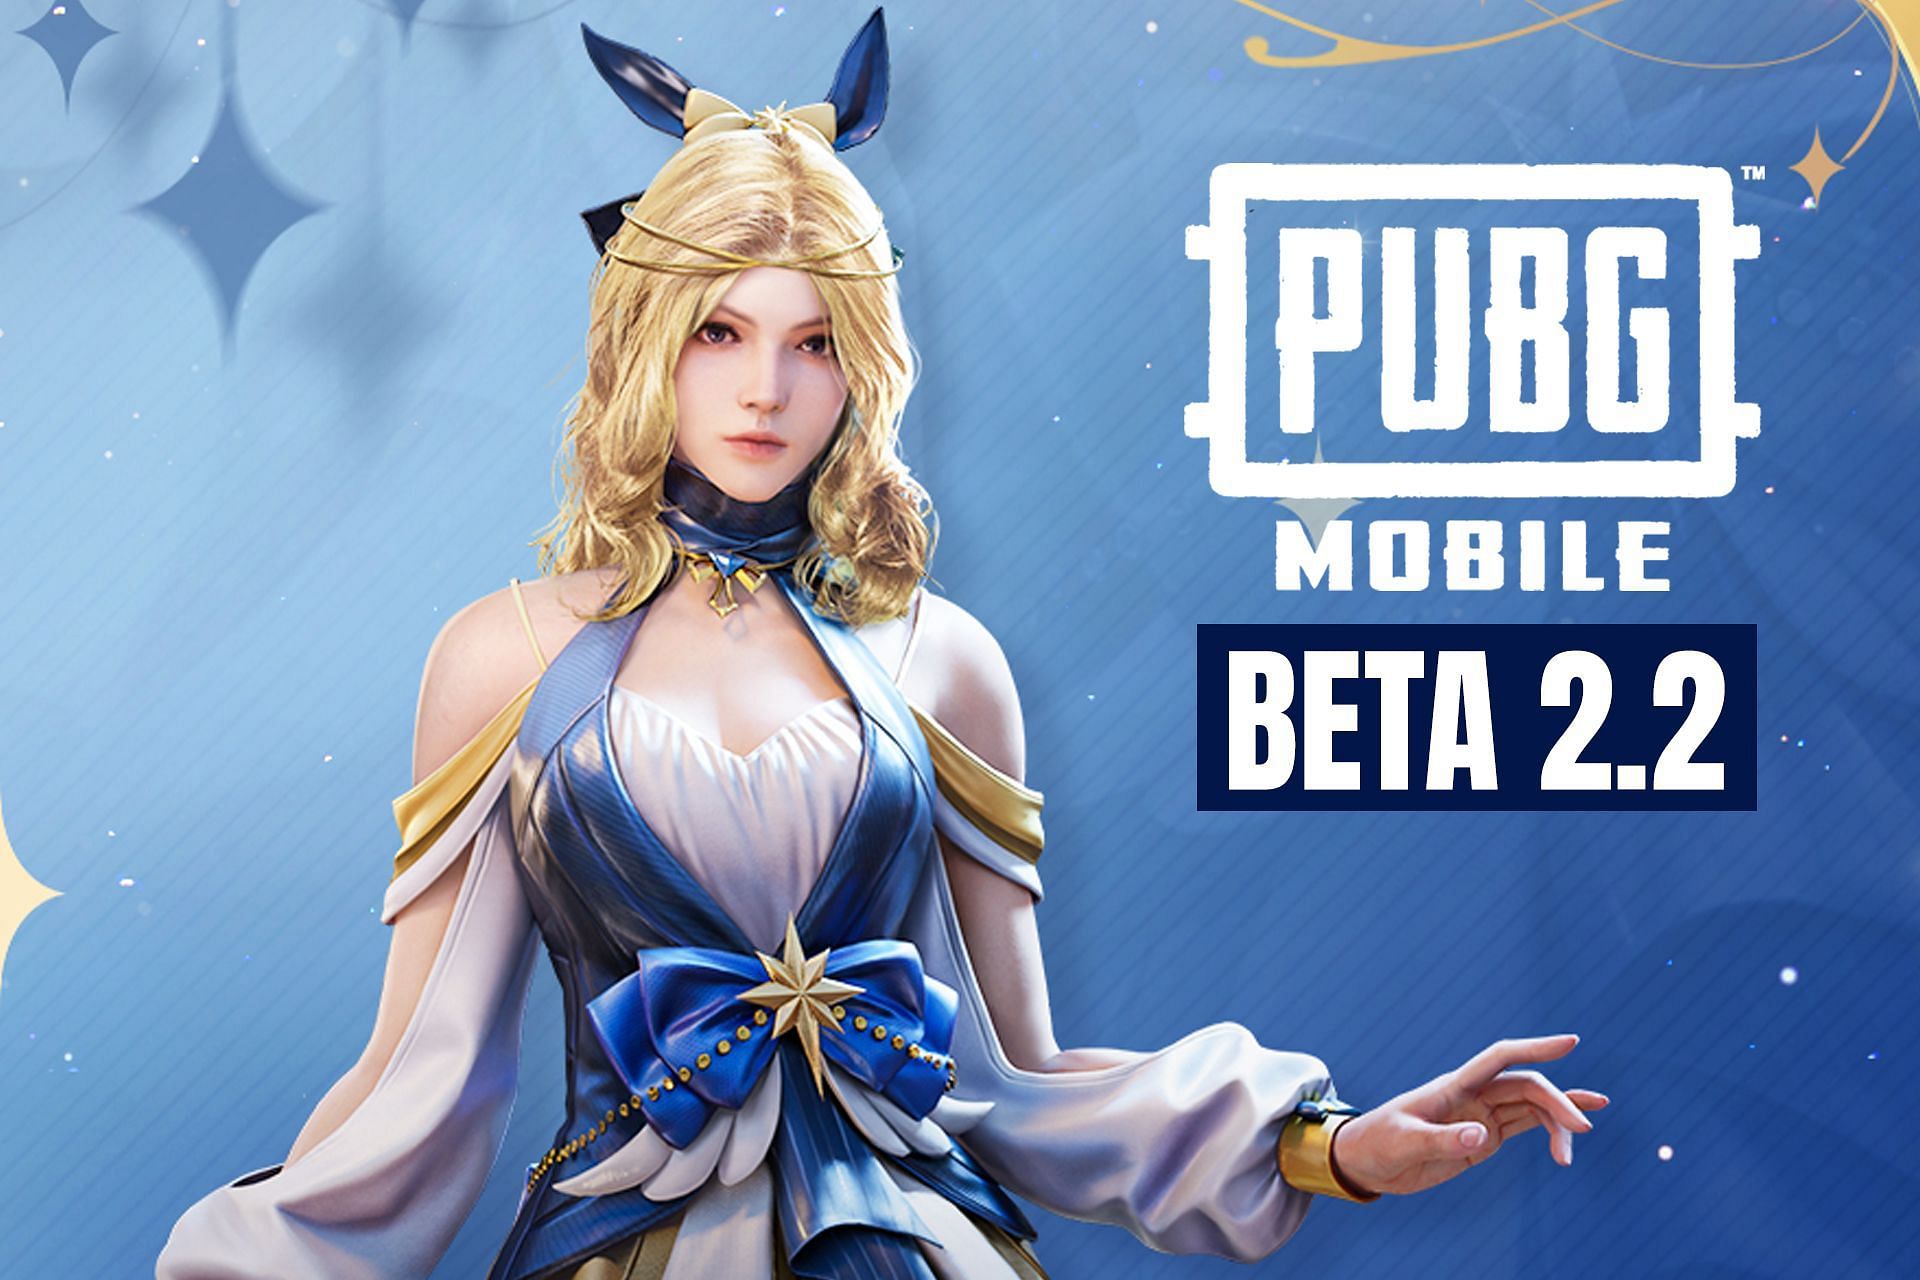 The PUBG Mobile 2.2 beta is arriving soon, much to the surprise of fans across the world (Image via Sportskeeda)